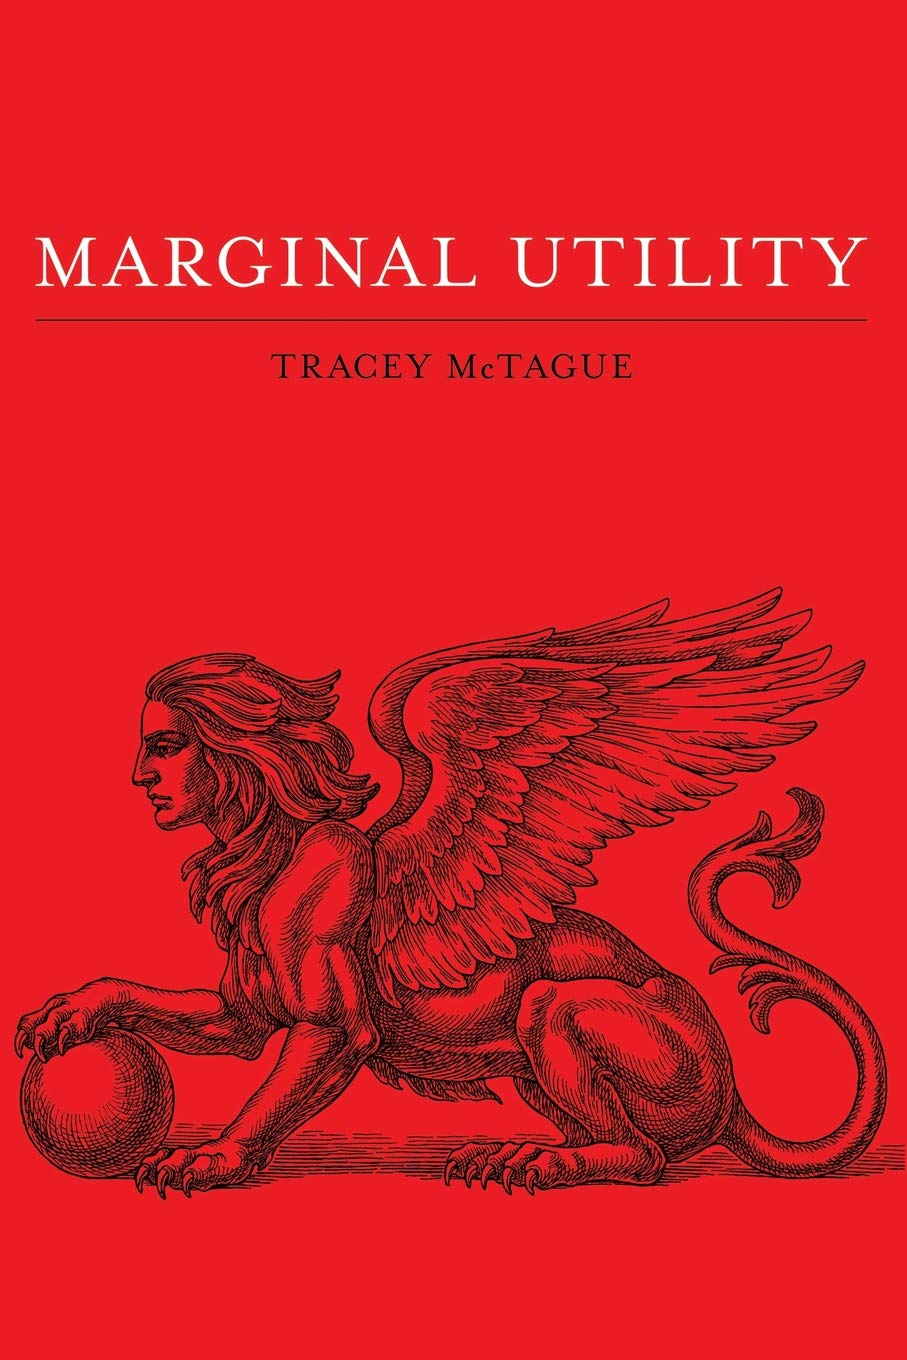 Marginal Utility, by Tracey McTague